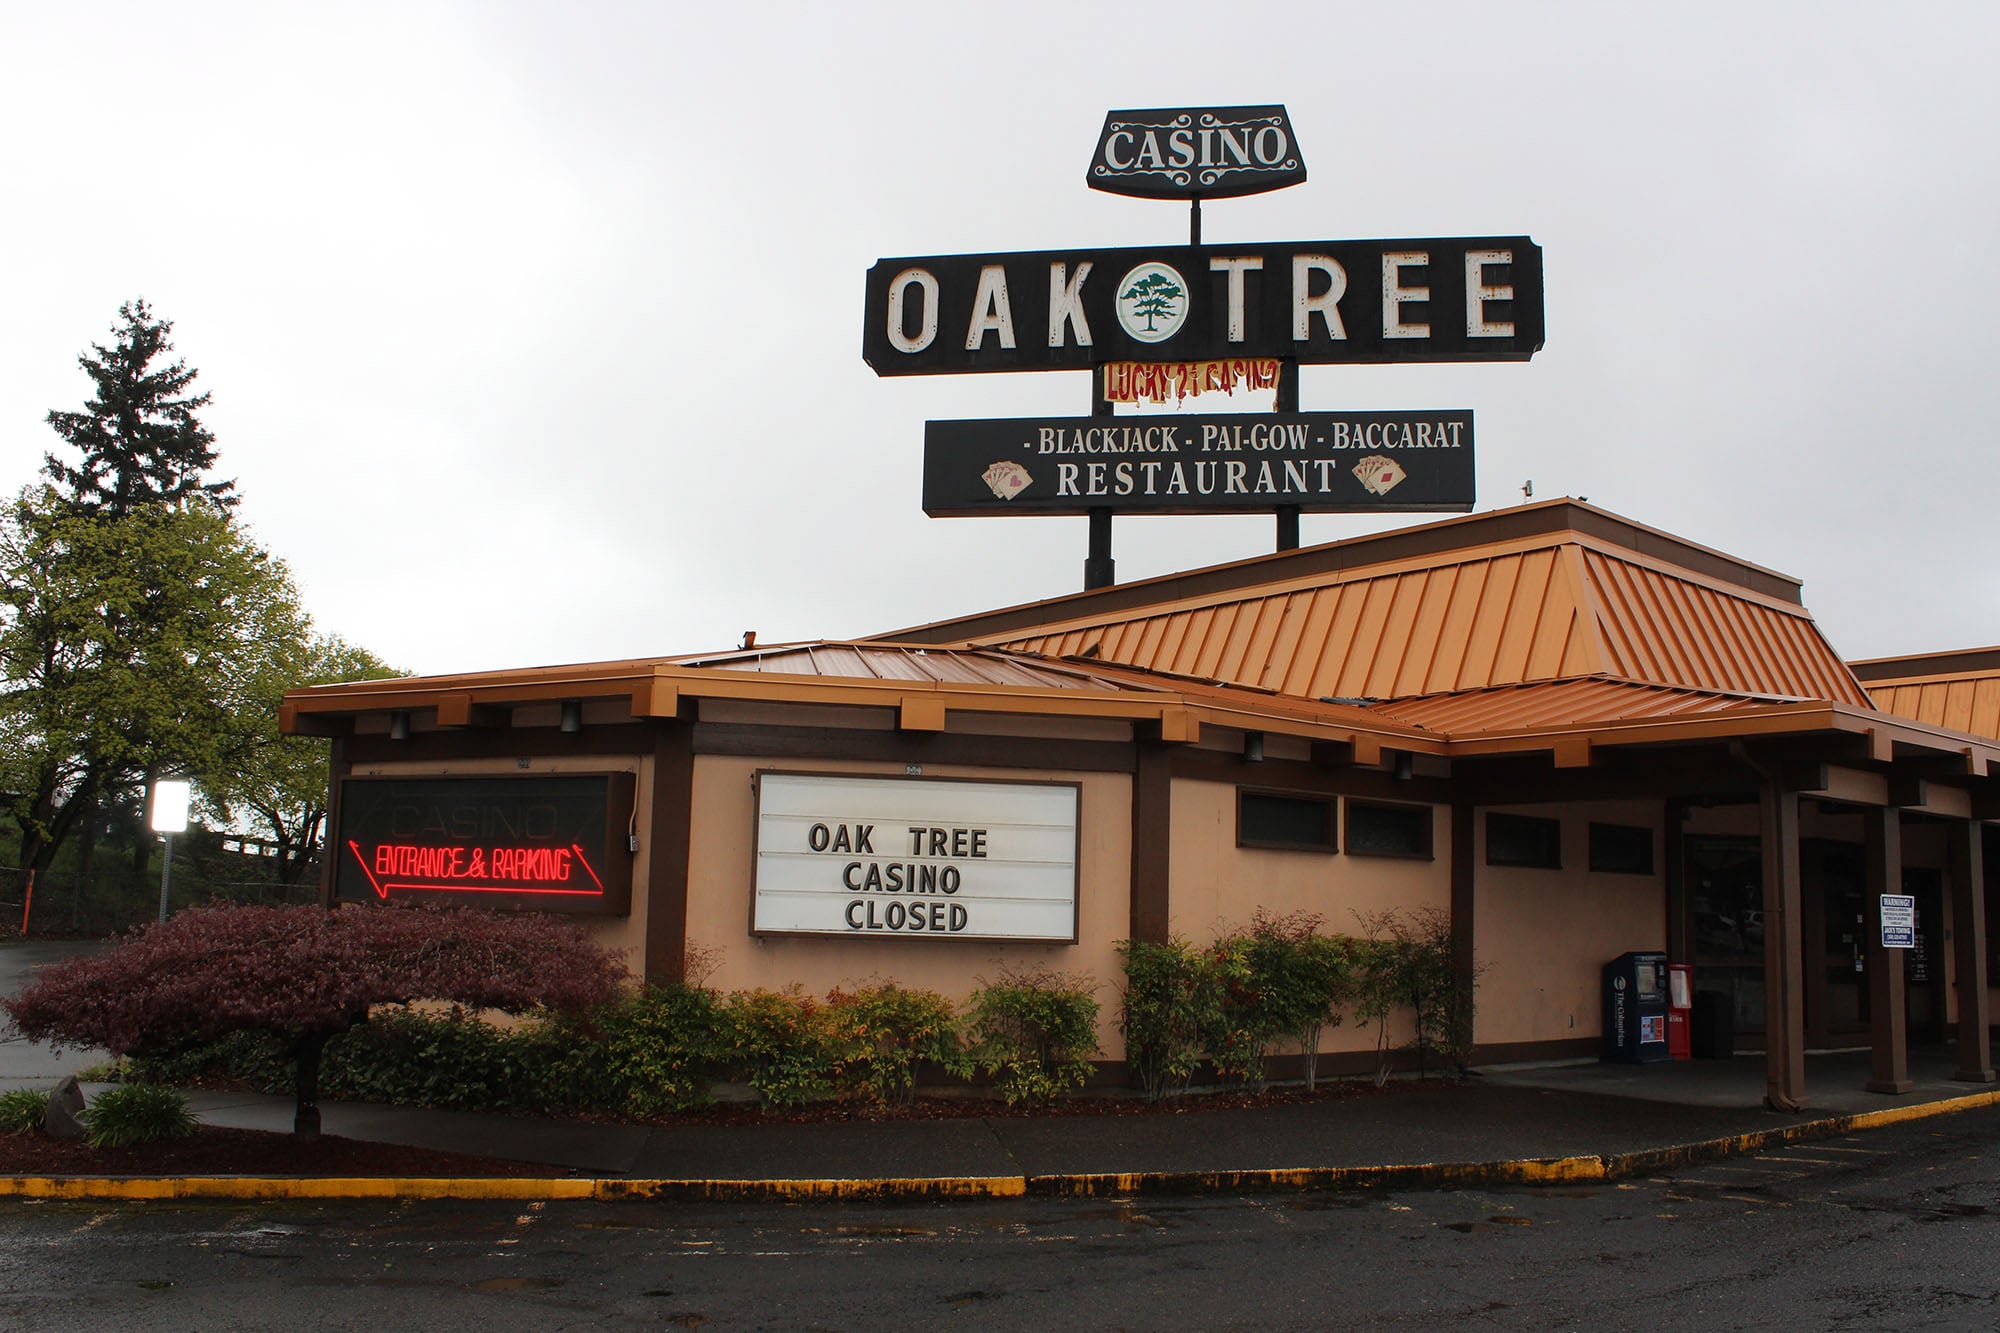 The Lucky 21 Casino, also known as the Oak Tree Casino, closed its doors permanently on Monday morning.